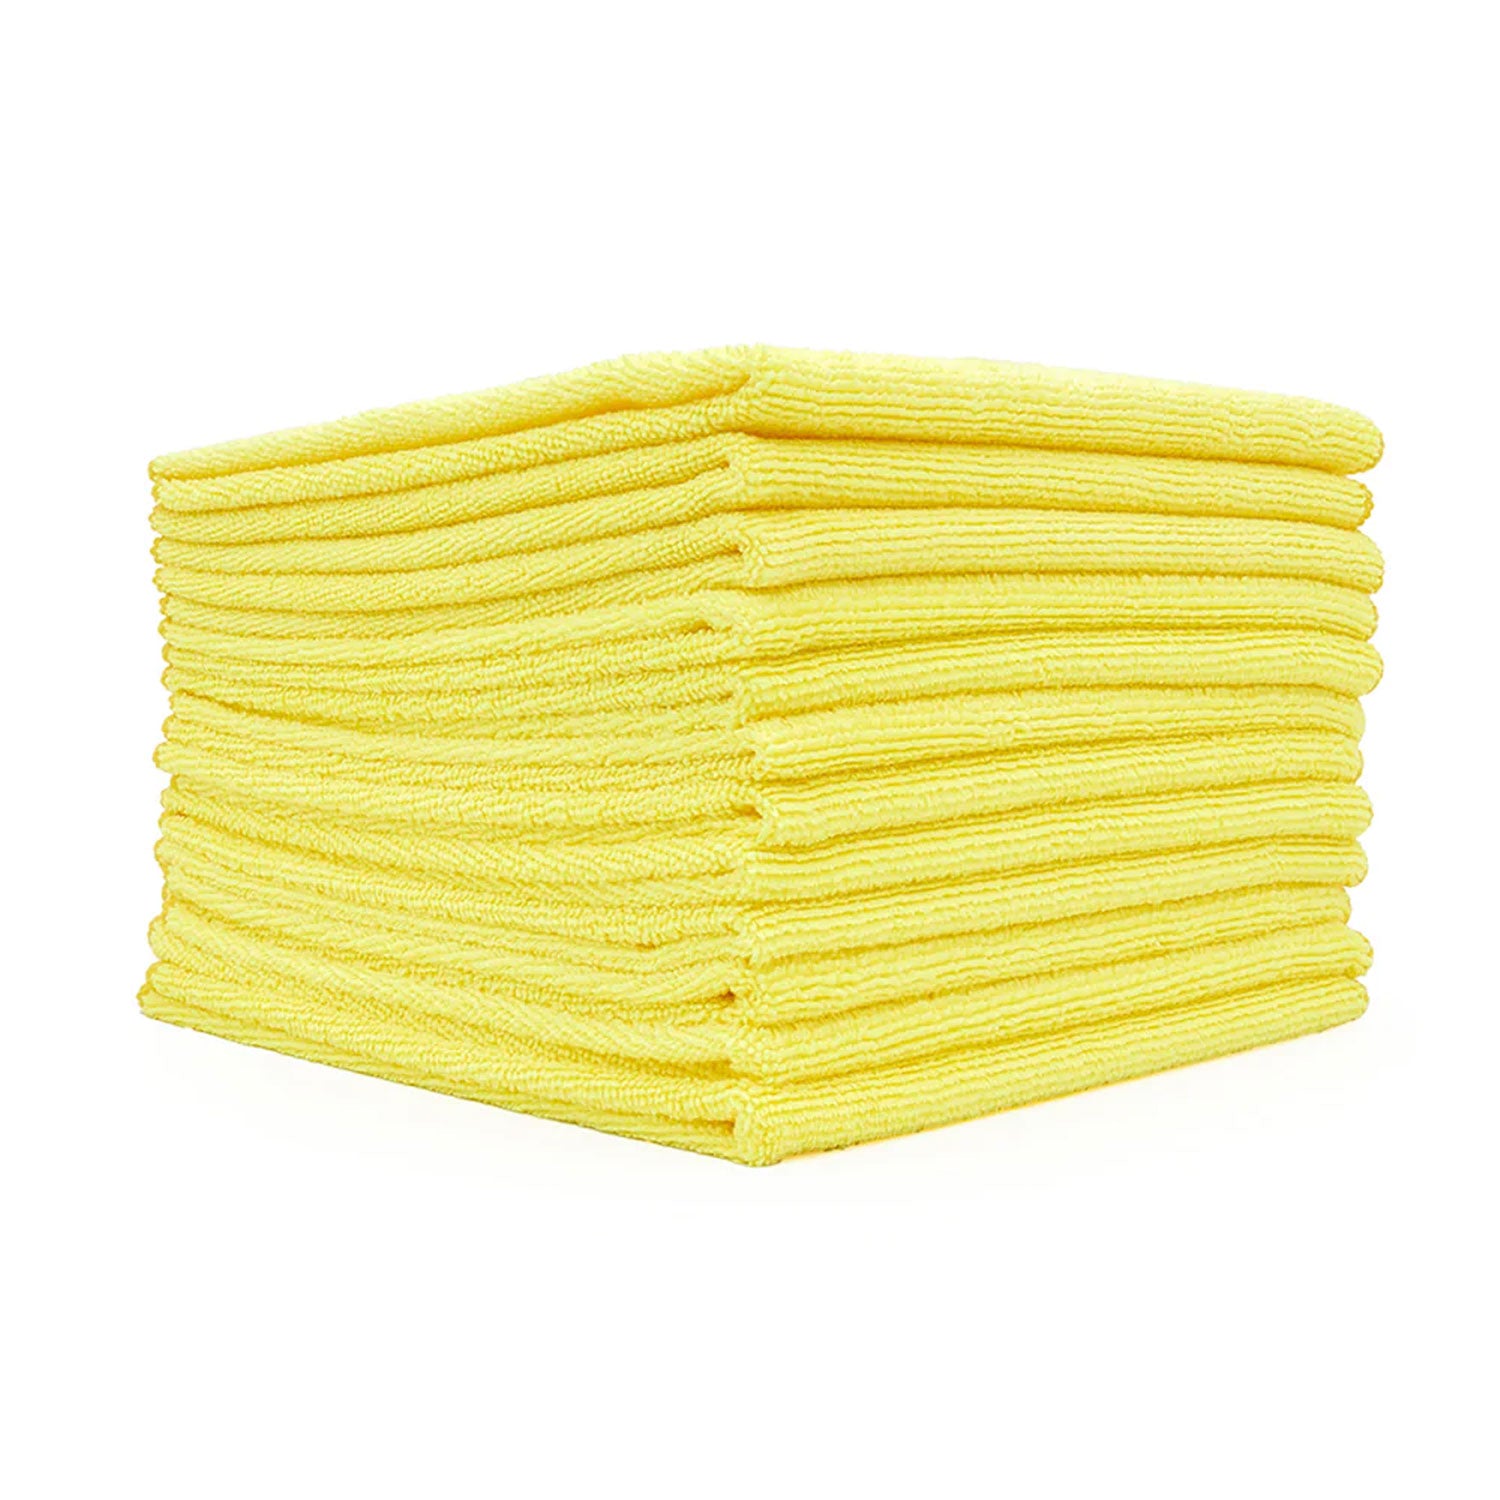 yellow-stitched-edge-towels